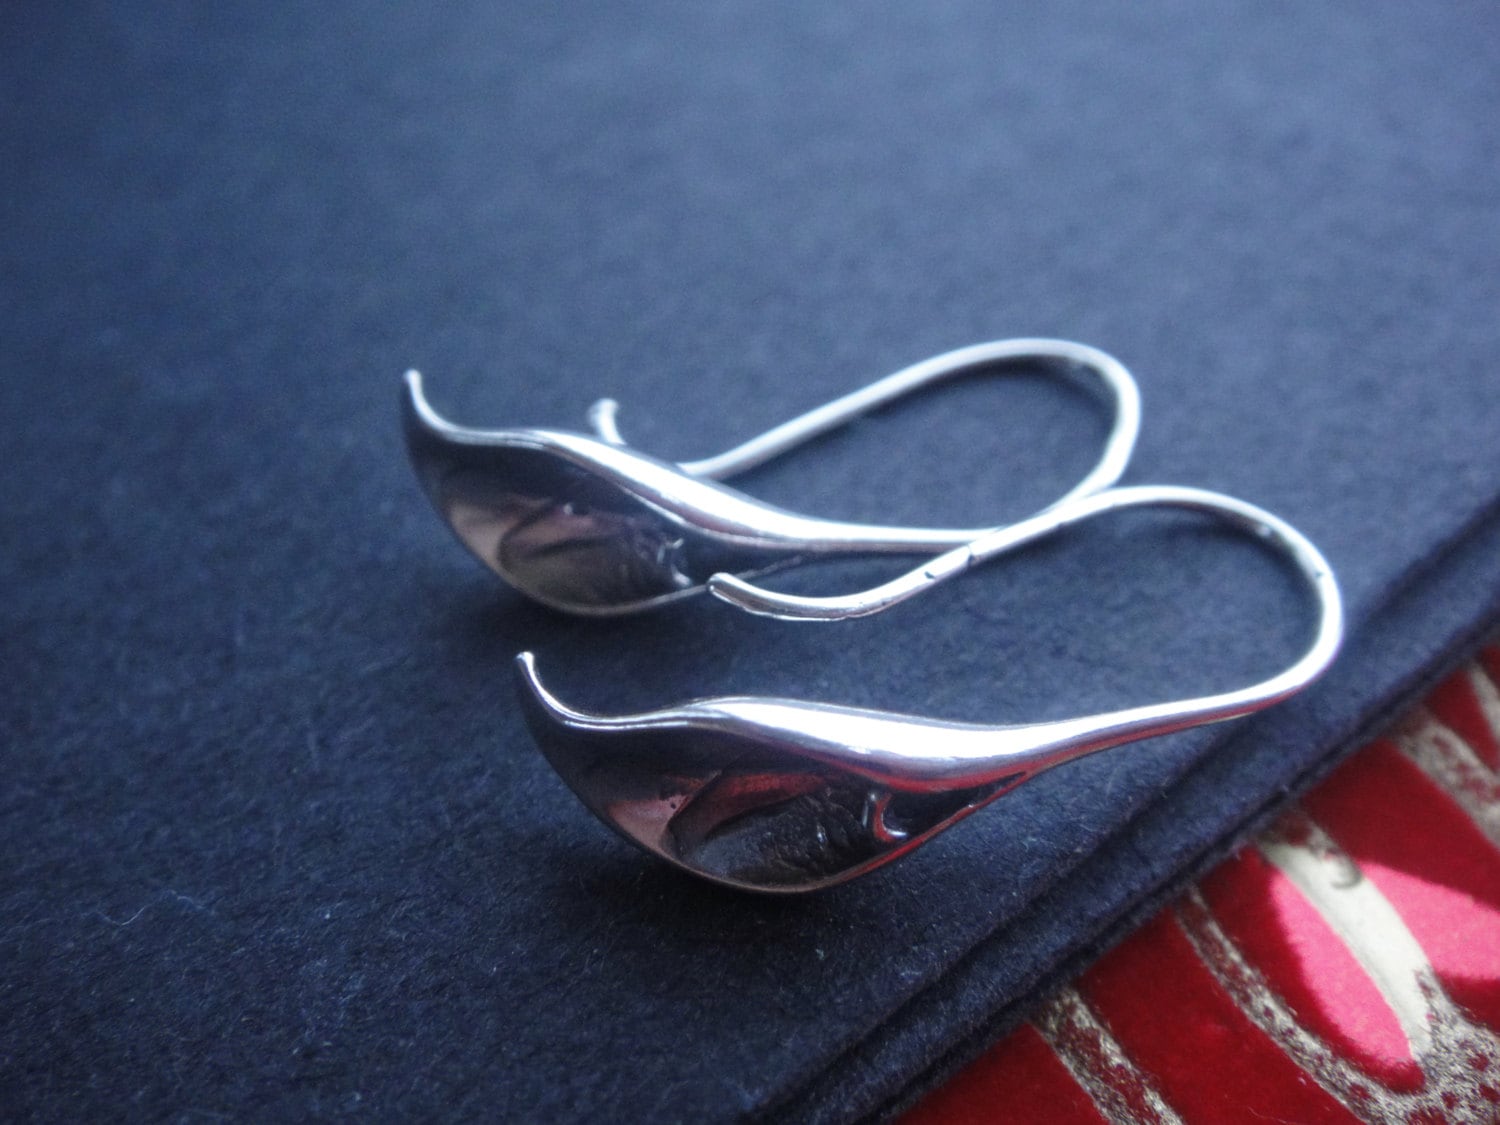 12x25 mm silver earring hook Calla Lily x 2 pc(s) 